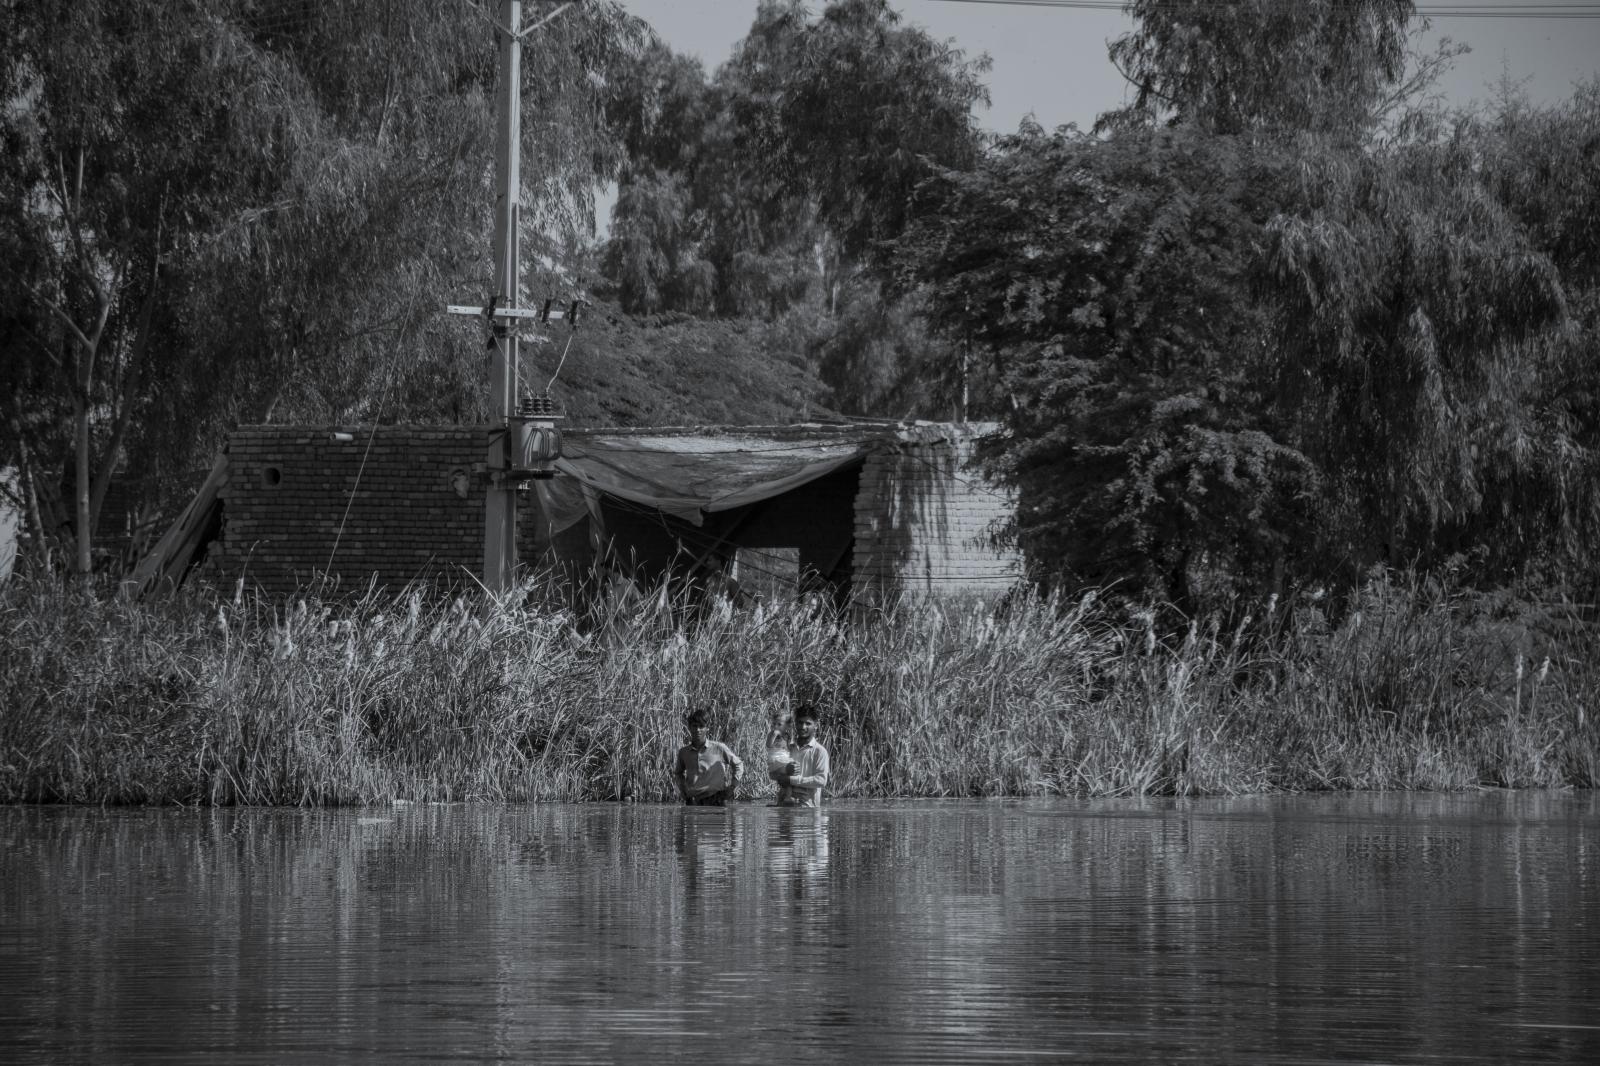 Discourses of Aftermath in Shikarpur - Two boys cross the flooded field while carrying a child...